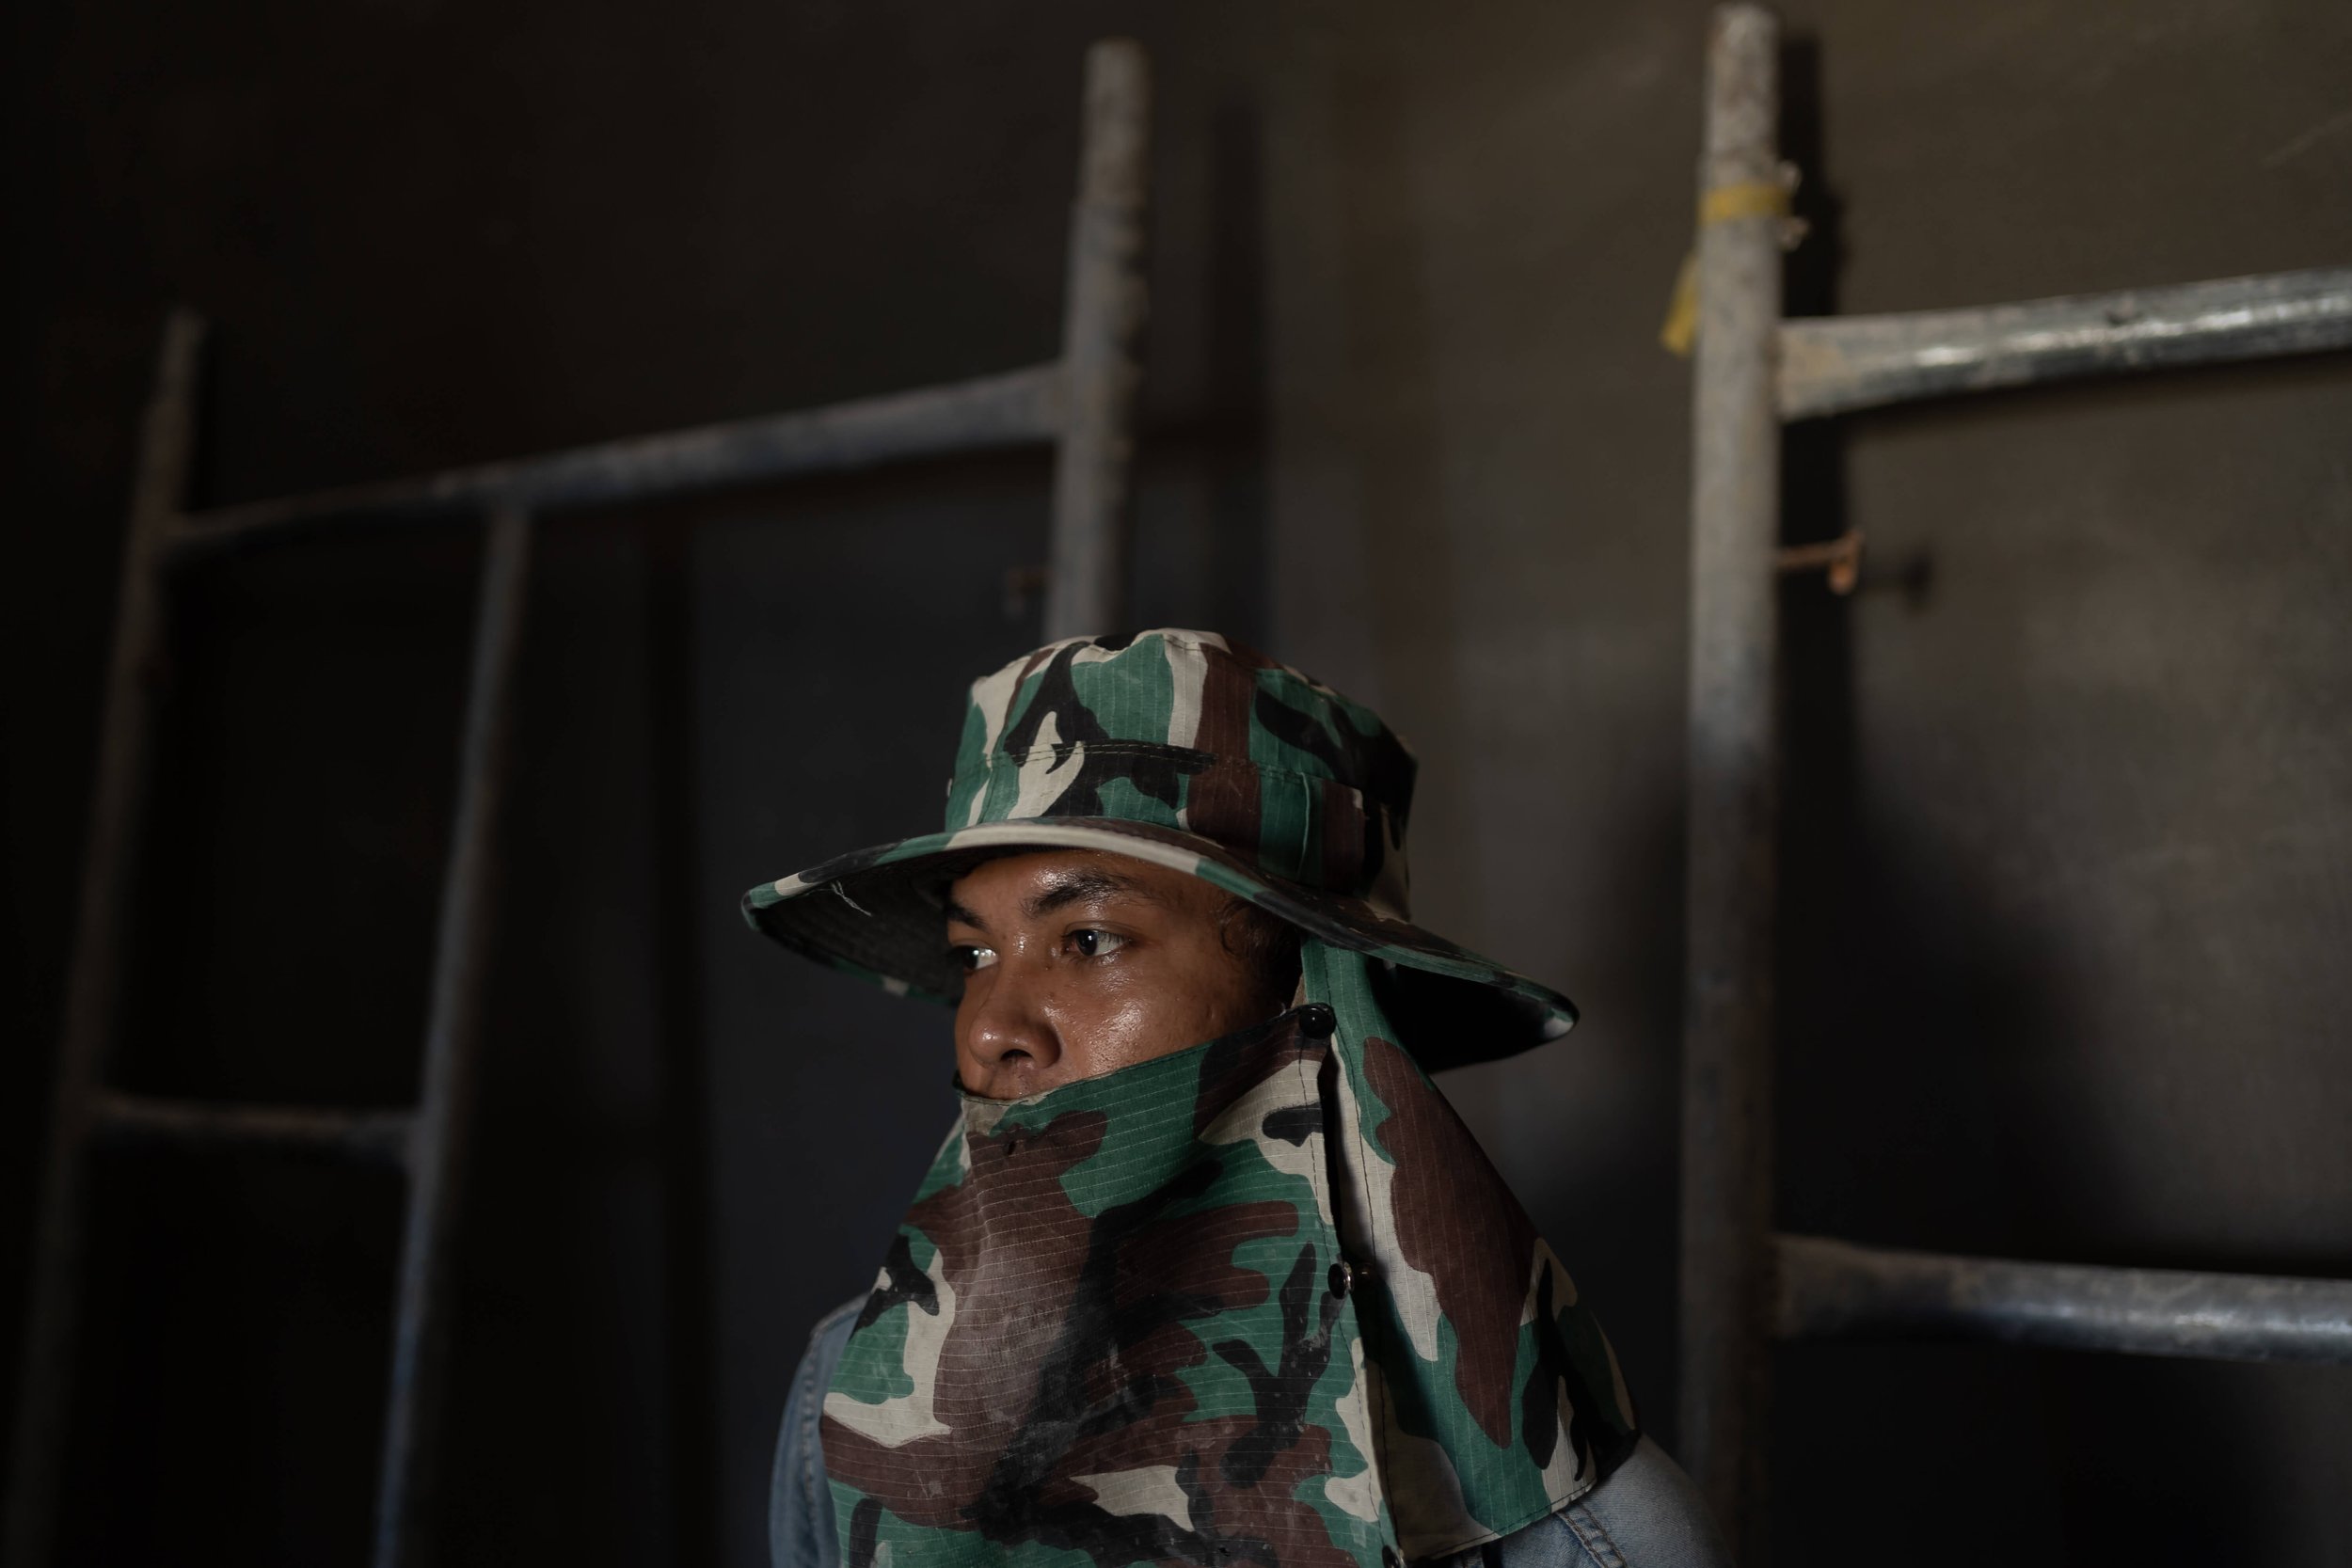  A portrait of Phearum, Ma Srieng’s cousin, at the new construction site he moved to in Phnom Penh’s Kambol district. He quit his job at the Bassac Lane site after 10 days, stating they failed to pay him on time and that the work was too “heavy.” 